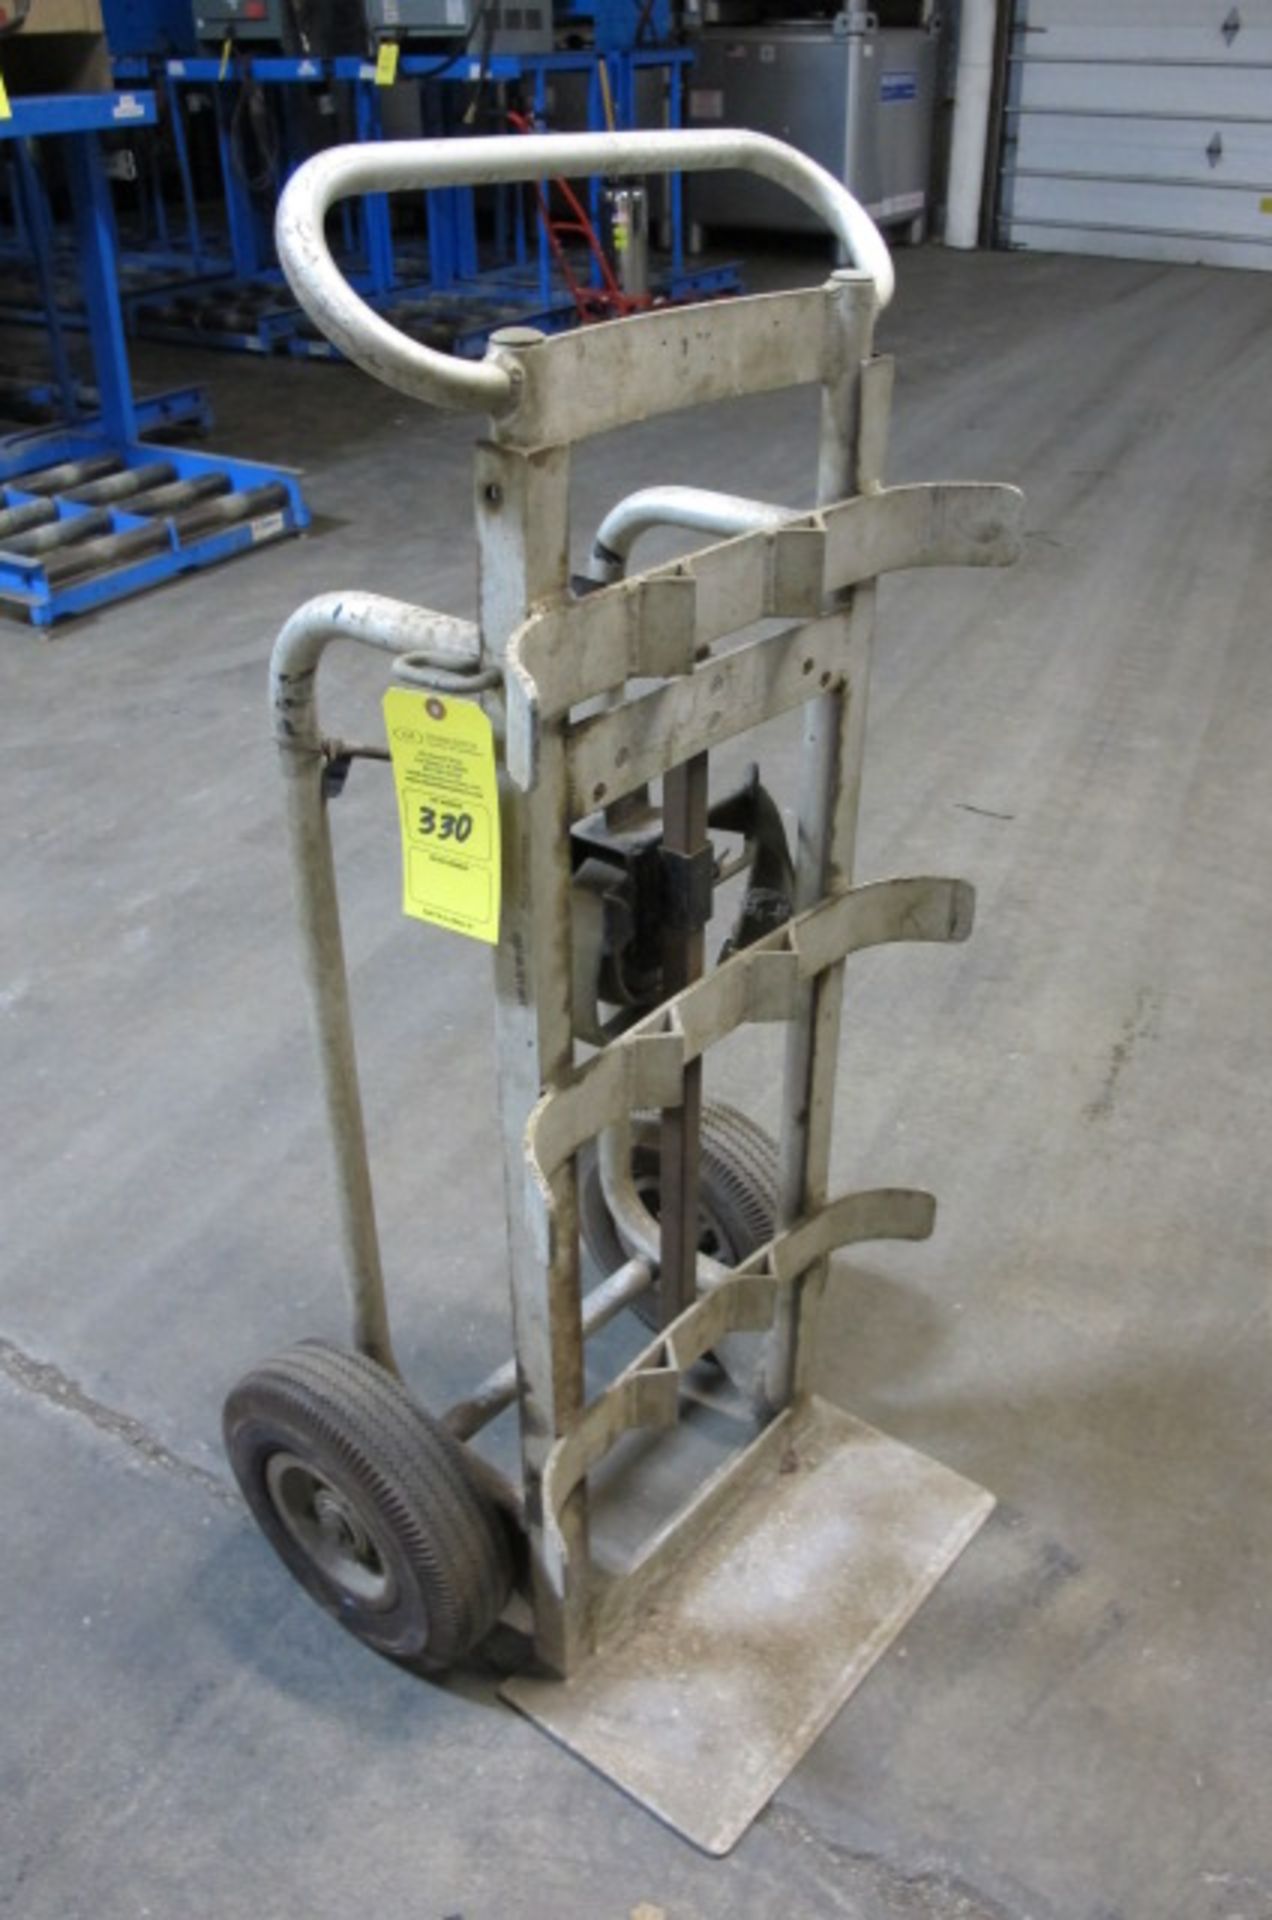 ALUMINUM 2-WHEEL BOTTLE CART 7678 OH 120, Lyons, Ohio 43523 - all Gaylord plastic pallets are NOT